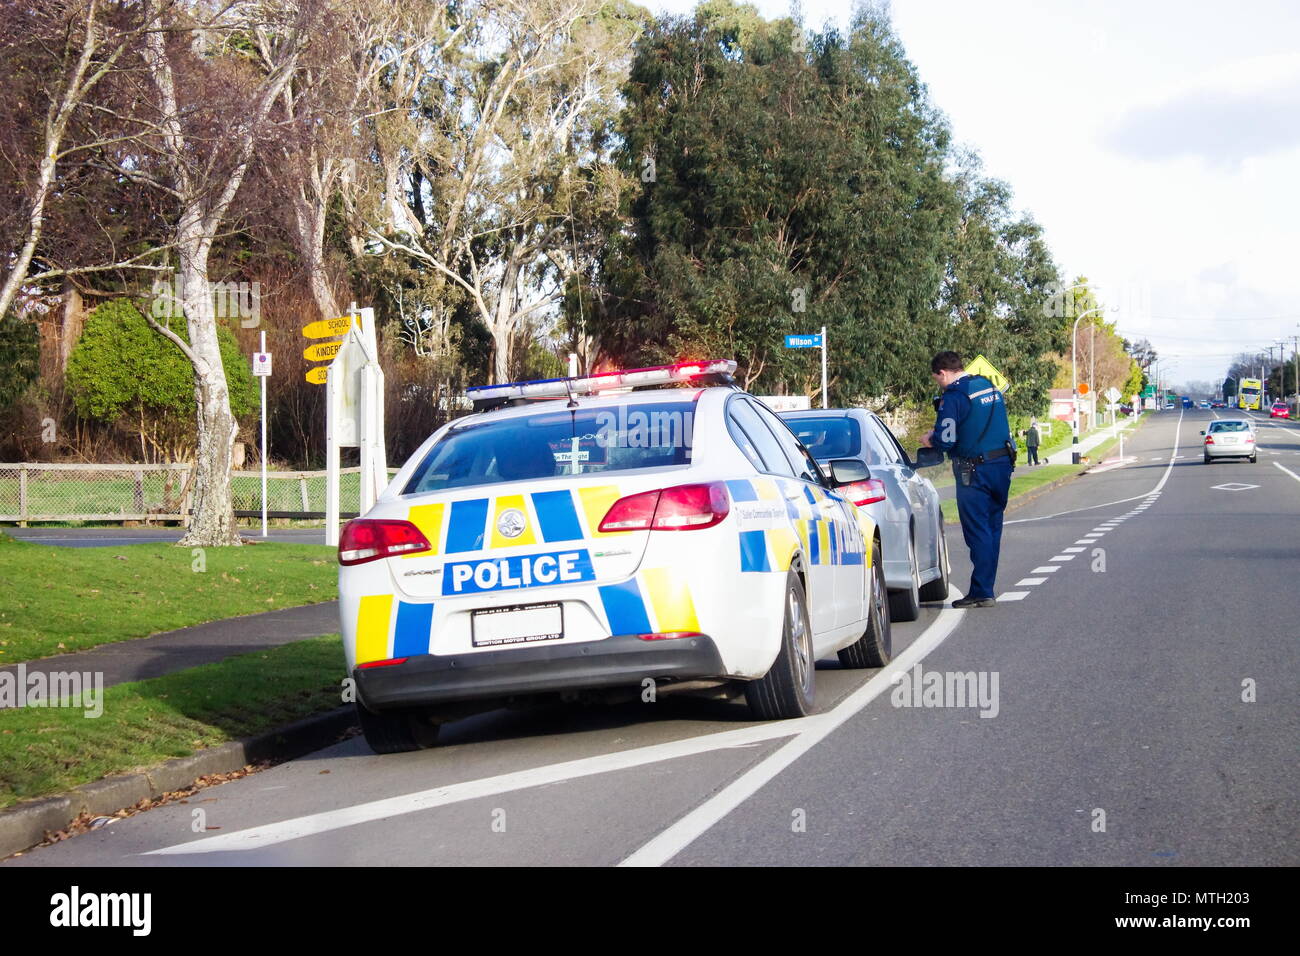 Bulls, New Zealand - 2 July 2016: A Police officer pulls over a speeding driver on the main road of Bulls in New Zealand. Stock Photo